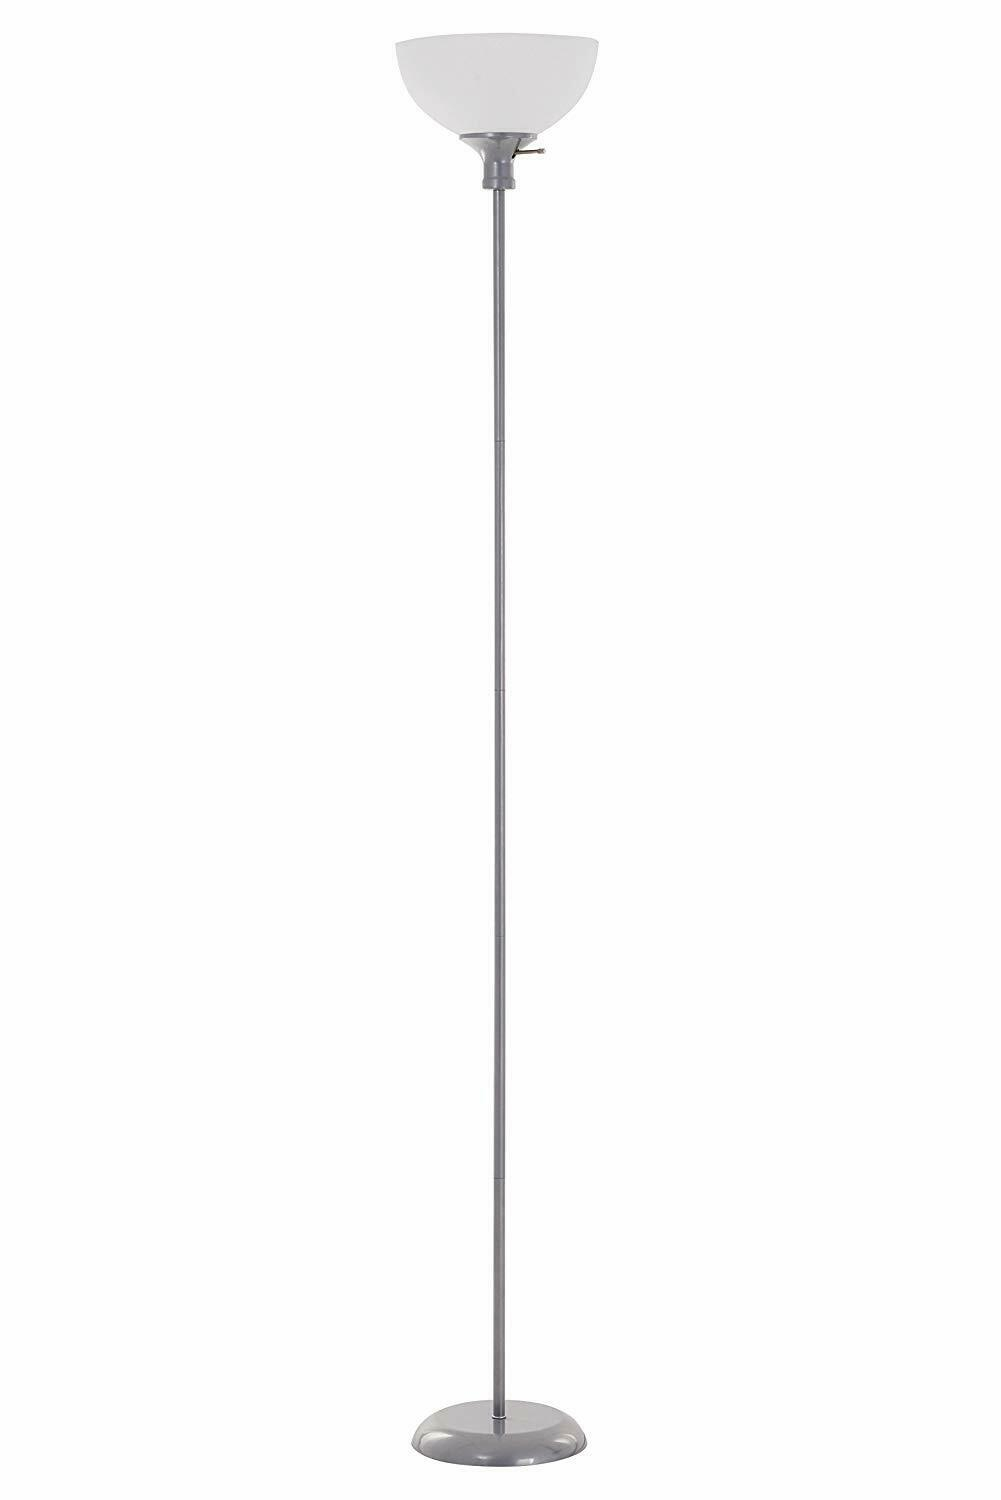 Catalina Lighting 20641 000 Transitional 3 Way Metal Torchiere Floor Lamp With W in sizing 1001 X 1500